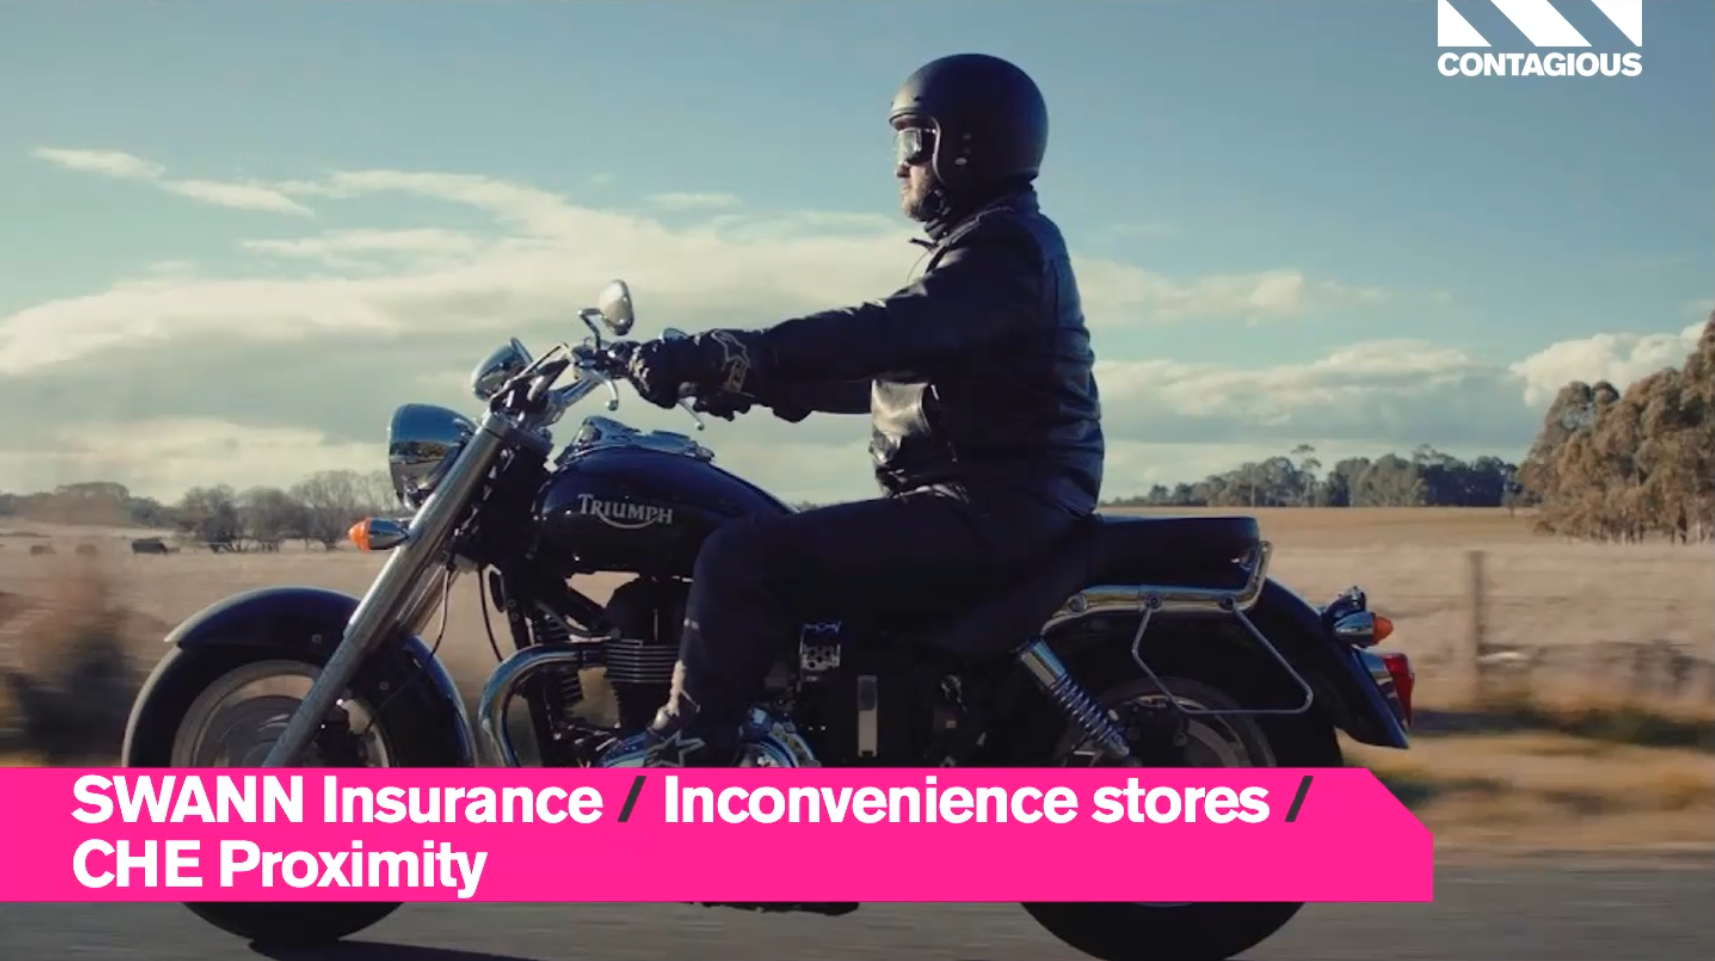 Audiense blog - SWANN Insurance | Inconvenience Stores | CHE Proxmity